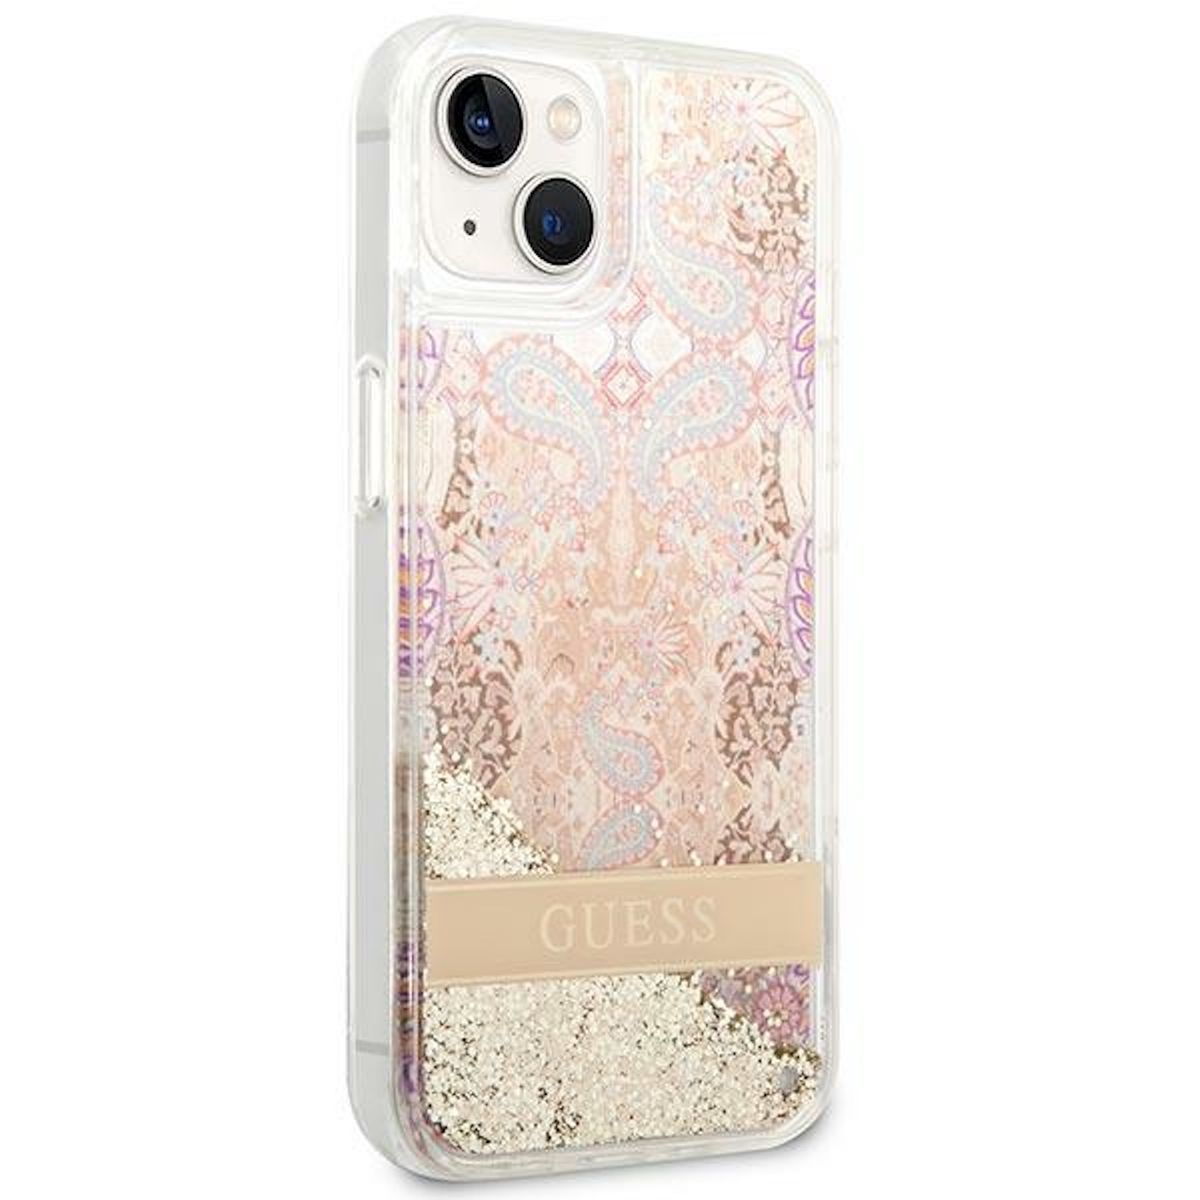 Design Liquid iPhone Gold Paisley Cover, Plus, 14 GUESS Apple, Backcover, Glitter